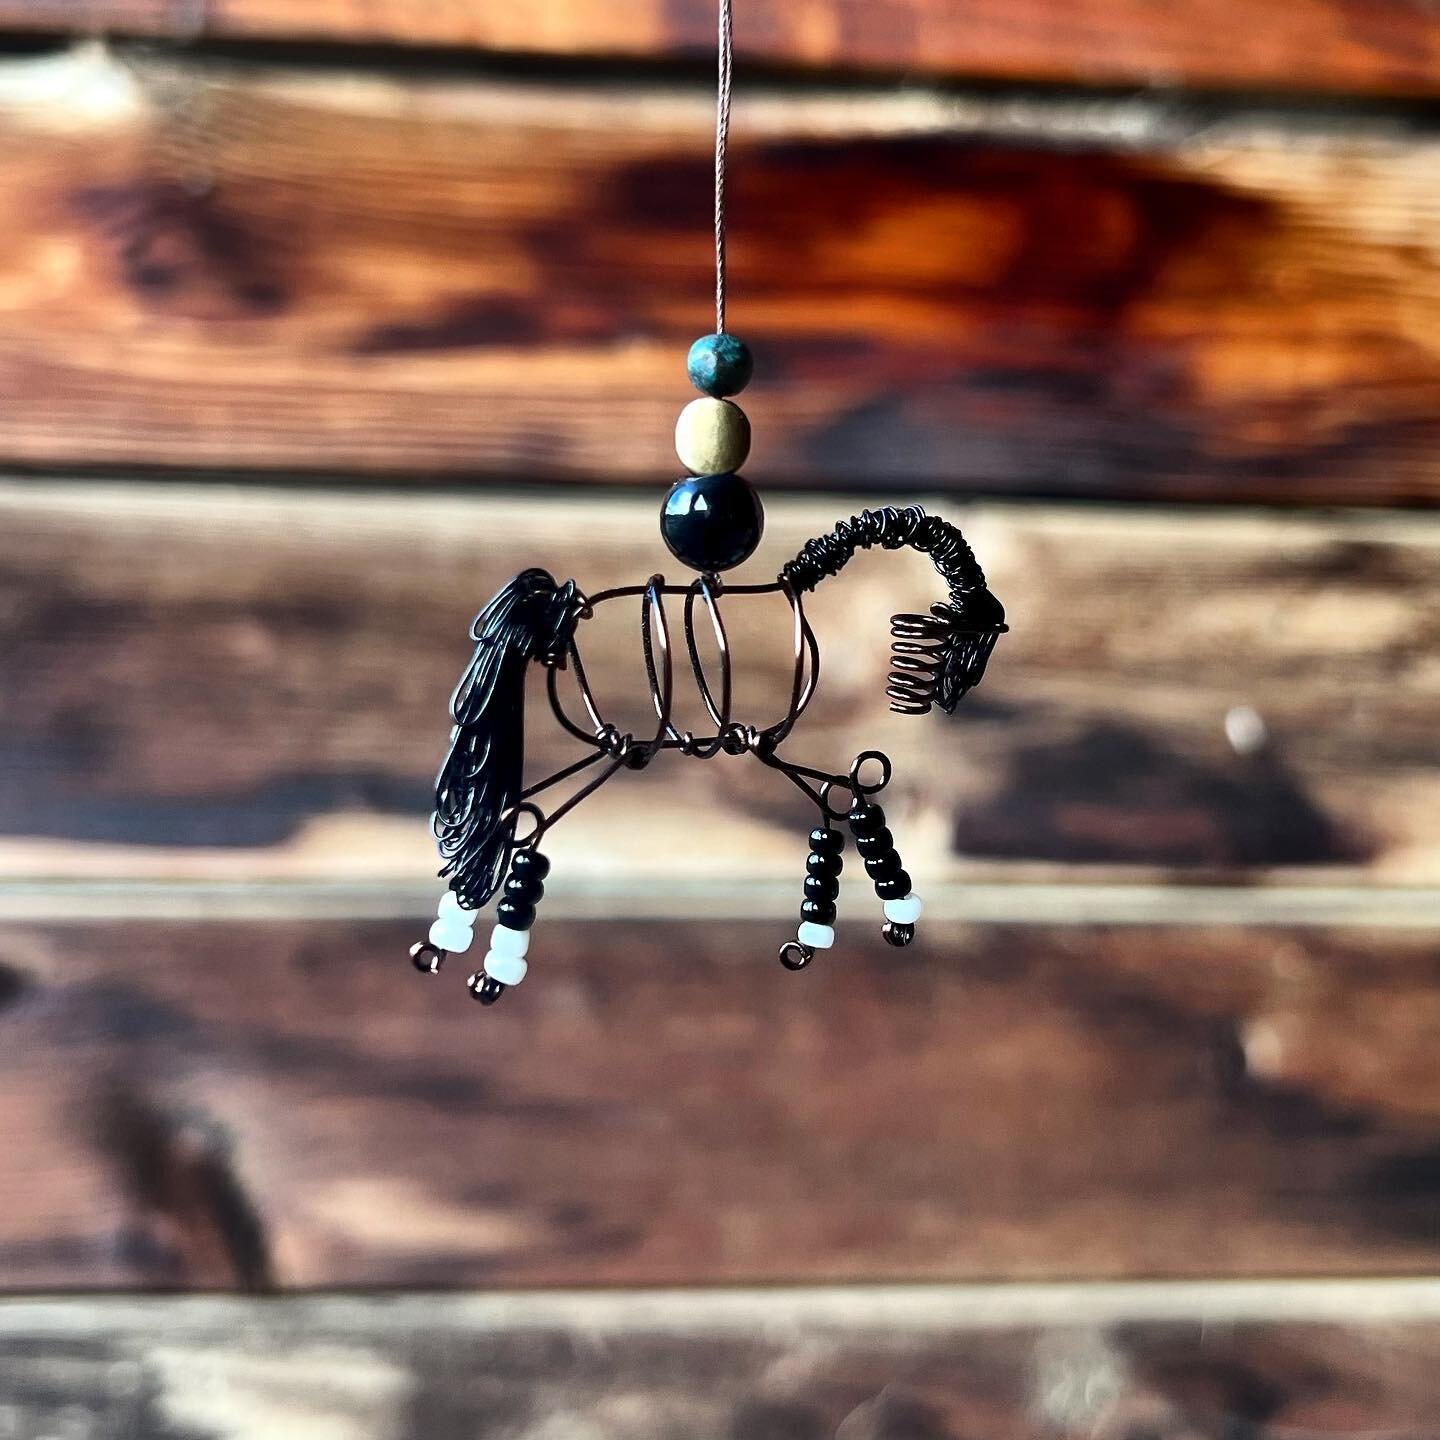 Cricket is now available in the sale barn along with many others!
www.livewireart.com
#livewirehorses #horsegifts #smallbusiness